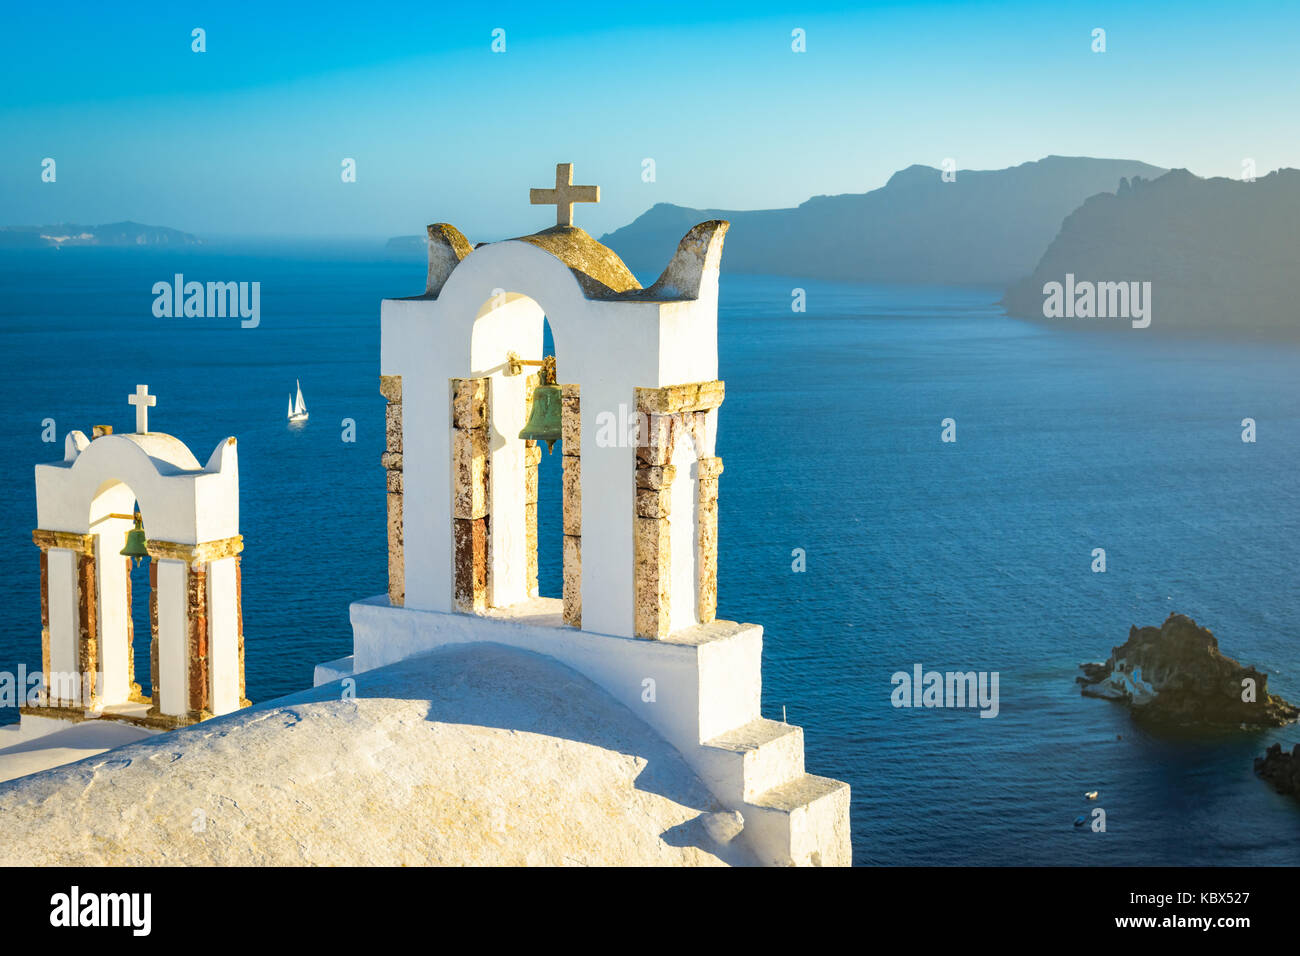 Church bells on a Greek Orthodox Church overlooking the Aegean Sea in the town of Oia on the island of Santorini in the Cyclades off the coast of main Stock Photo